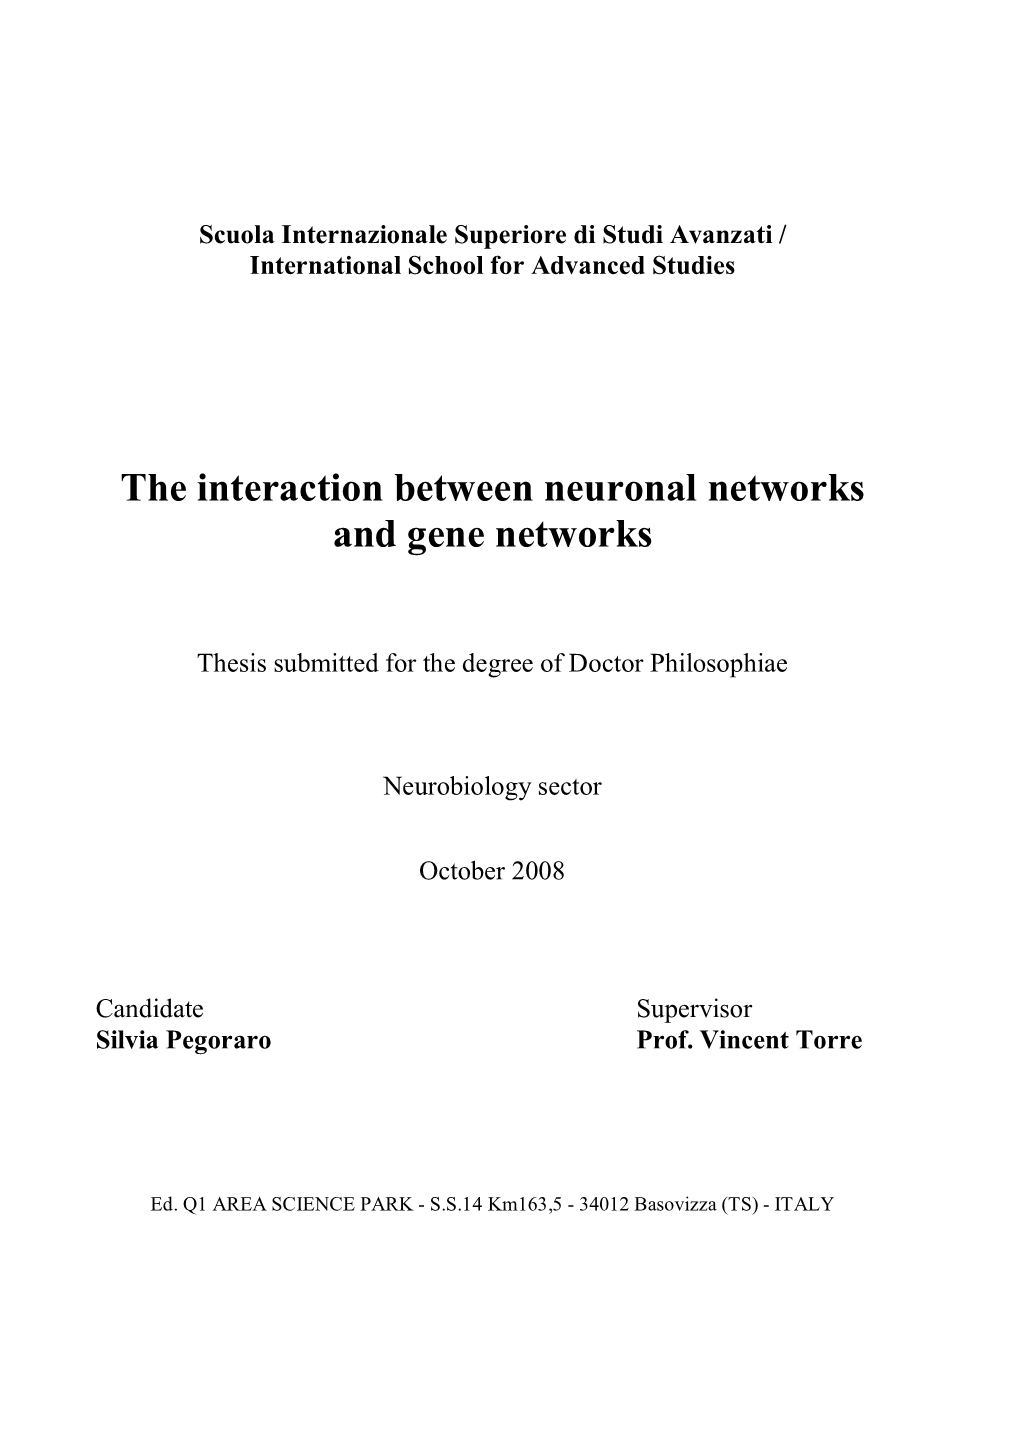 The Interaction Between Neuronal Networks and Gene Networks